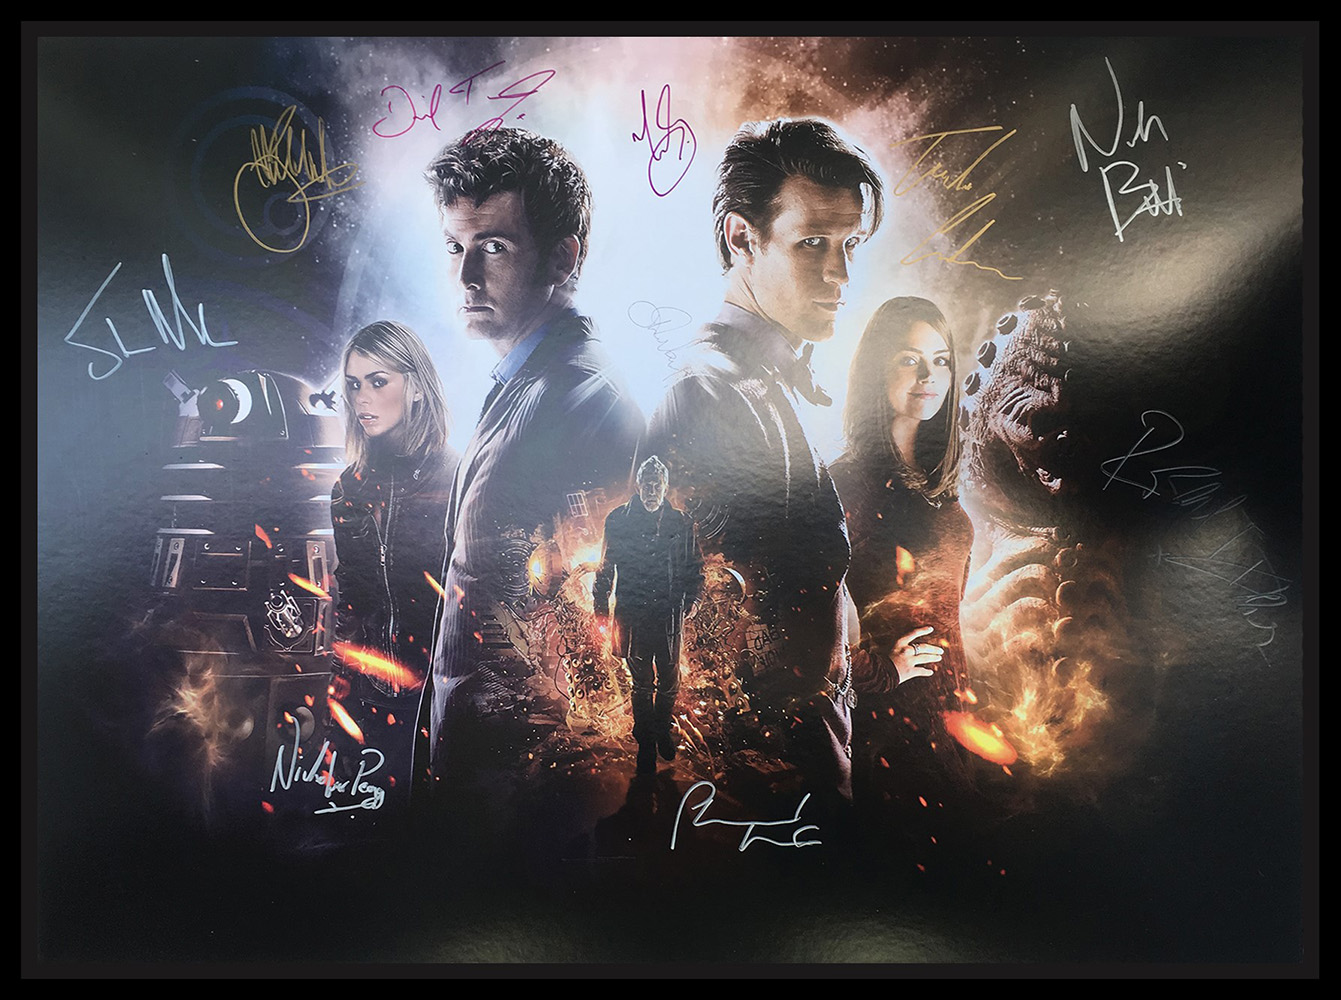 Framed Doctor Who 50th Anniversary Signed Poster